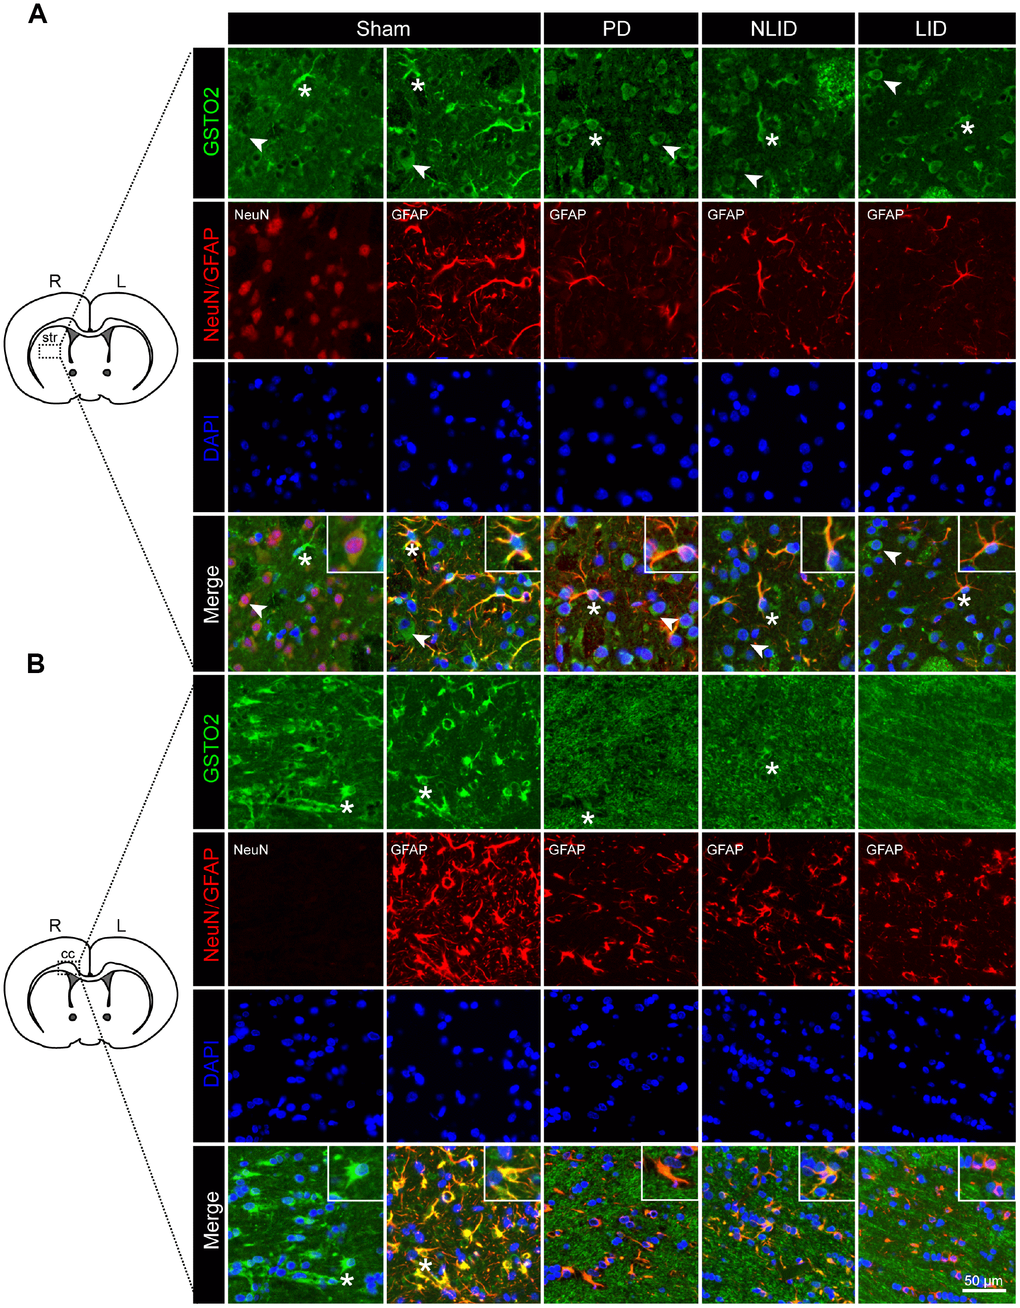 Decreased expression of GSTO2 in neurons and astrocytes of the brain in PD and LID rats. (A, B) Double immunofluorescence labeling of GSTO2 and neuron or astrocyte markers in the striatum (A) and corpus callosum (cc) (B) of PD and LID rats and their corresponding controls (n = 3). A single cell is shown in the insets. Arrows and asterisks indicate neurons and astrocytes, respectively, expressing GSTO2.